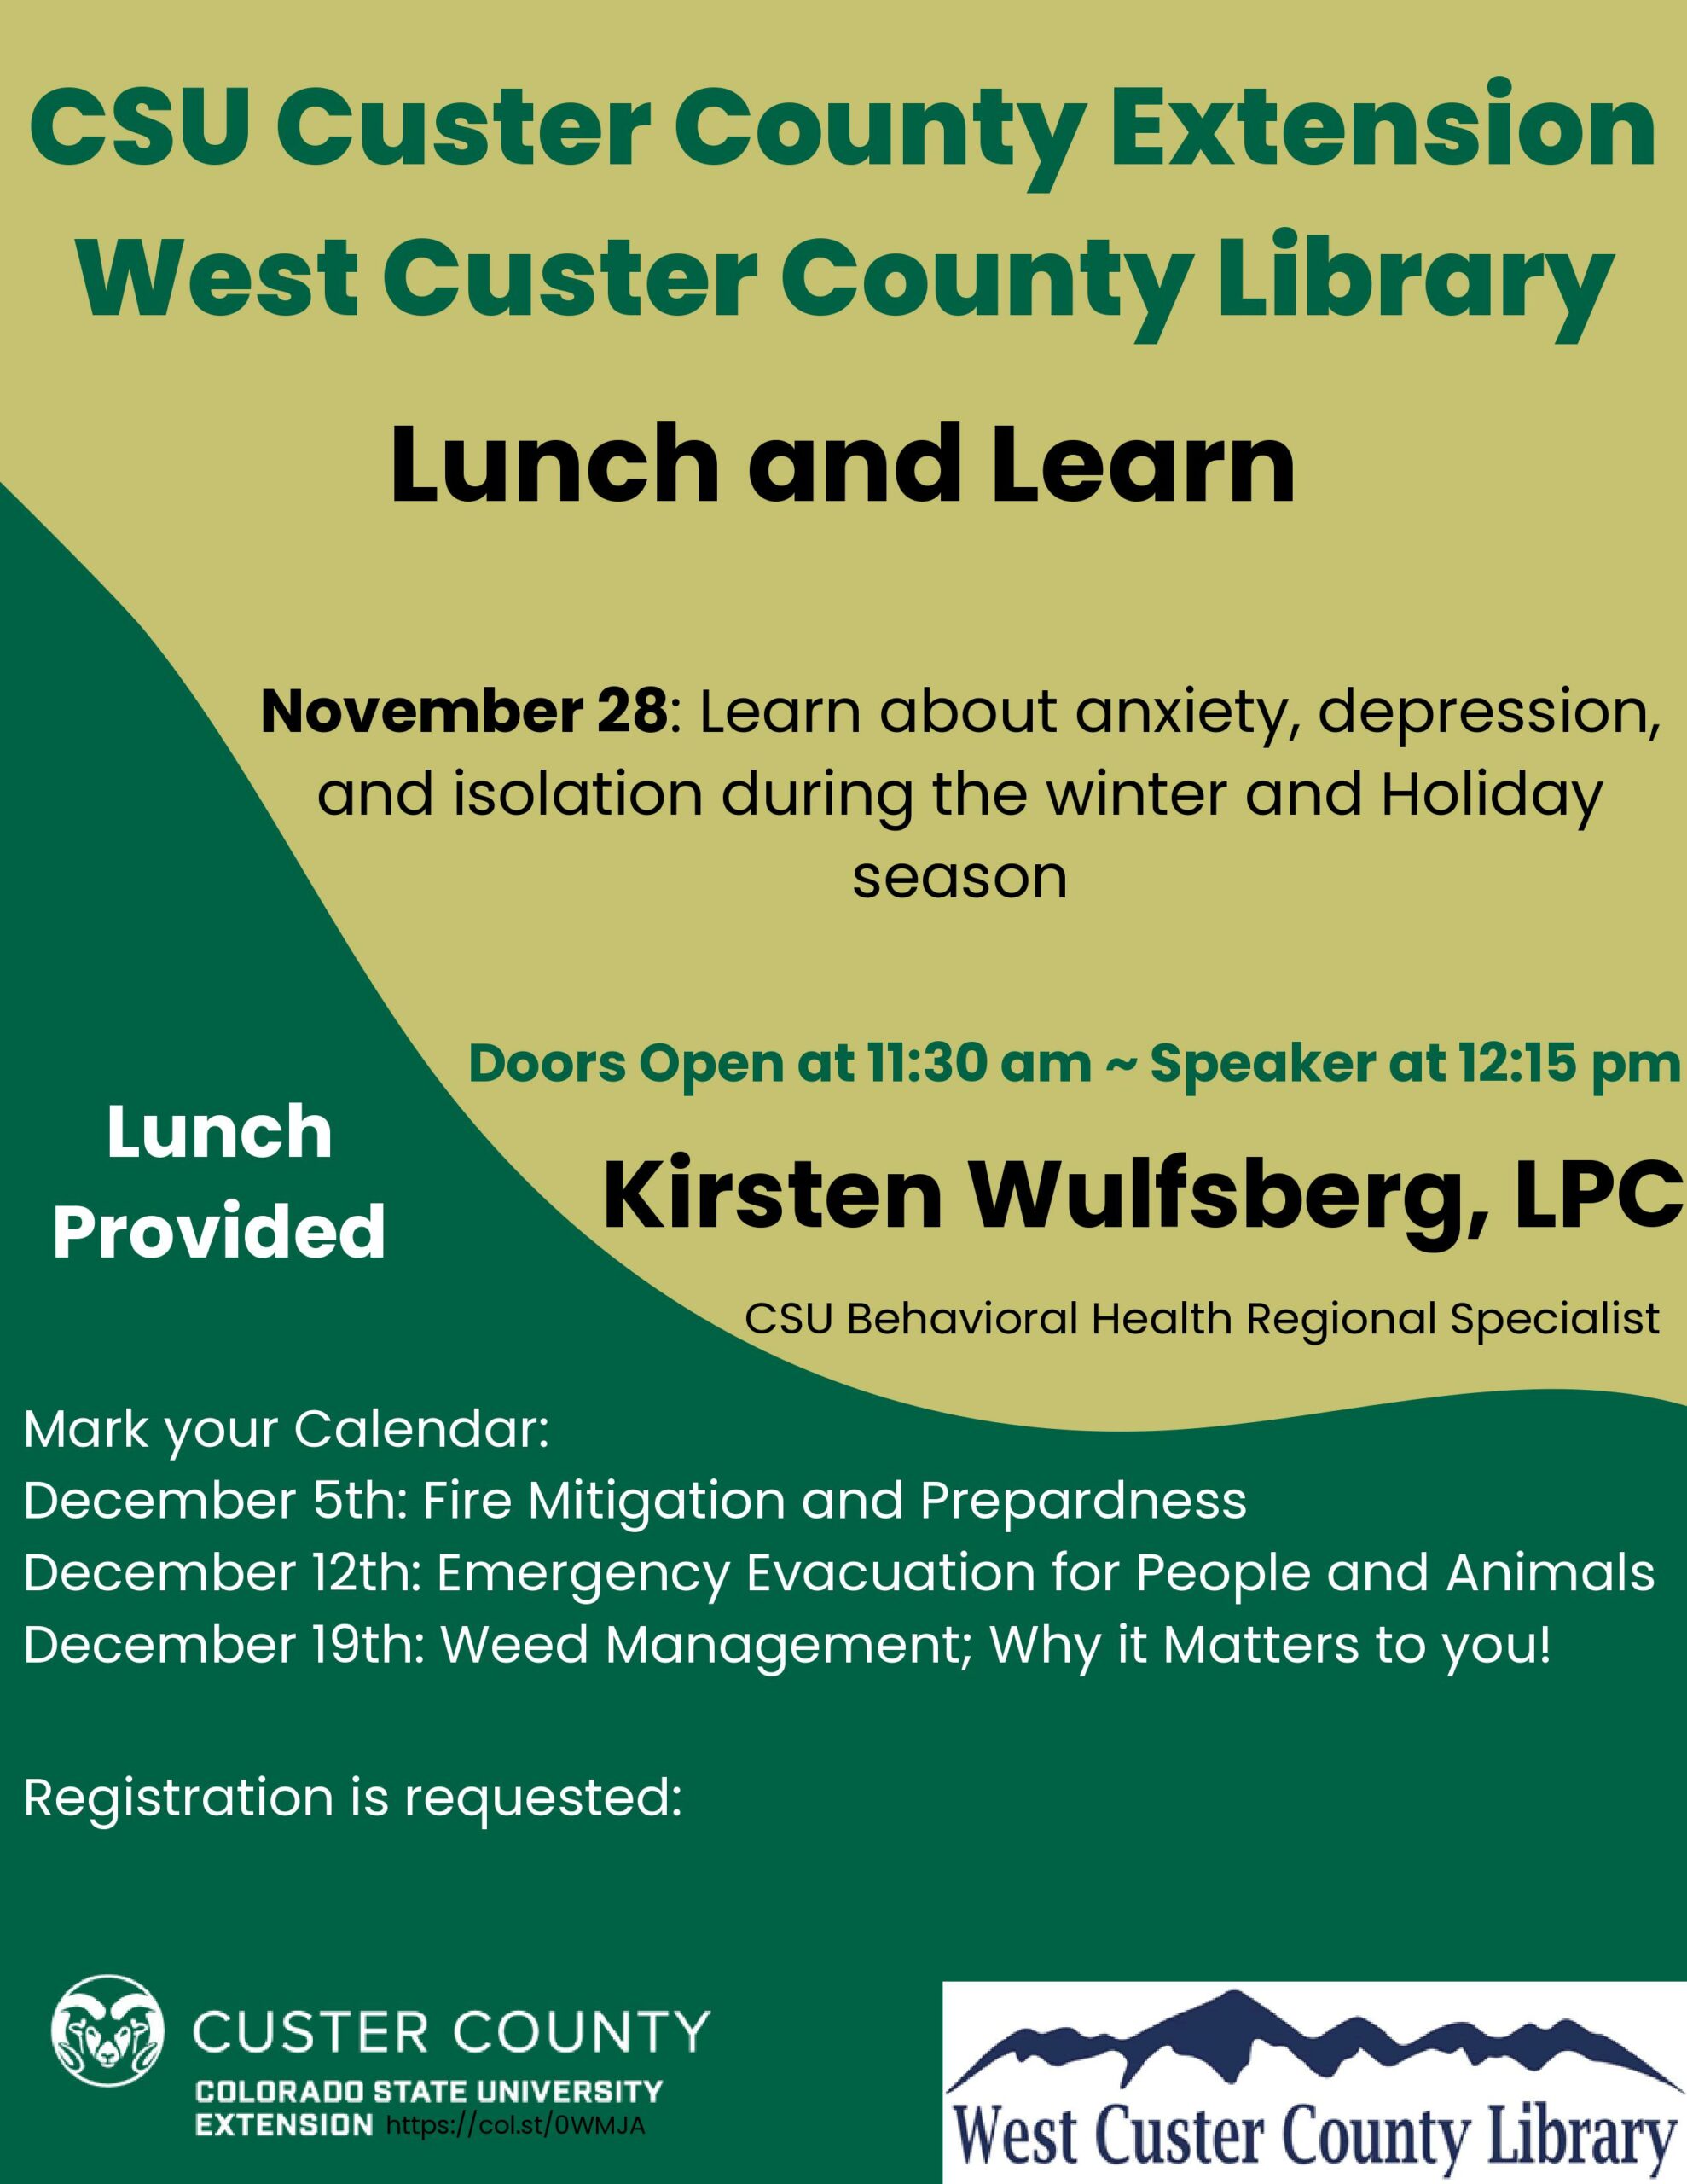 CSU Custer County Extension Lunch & Learn Series